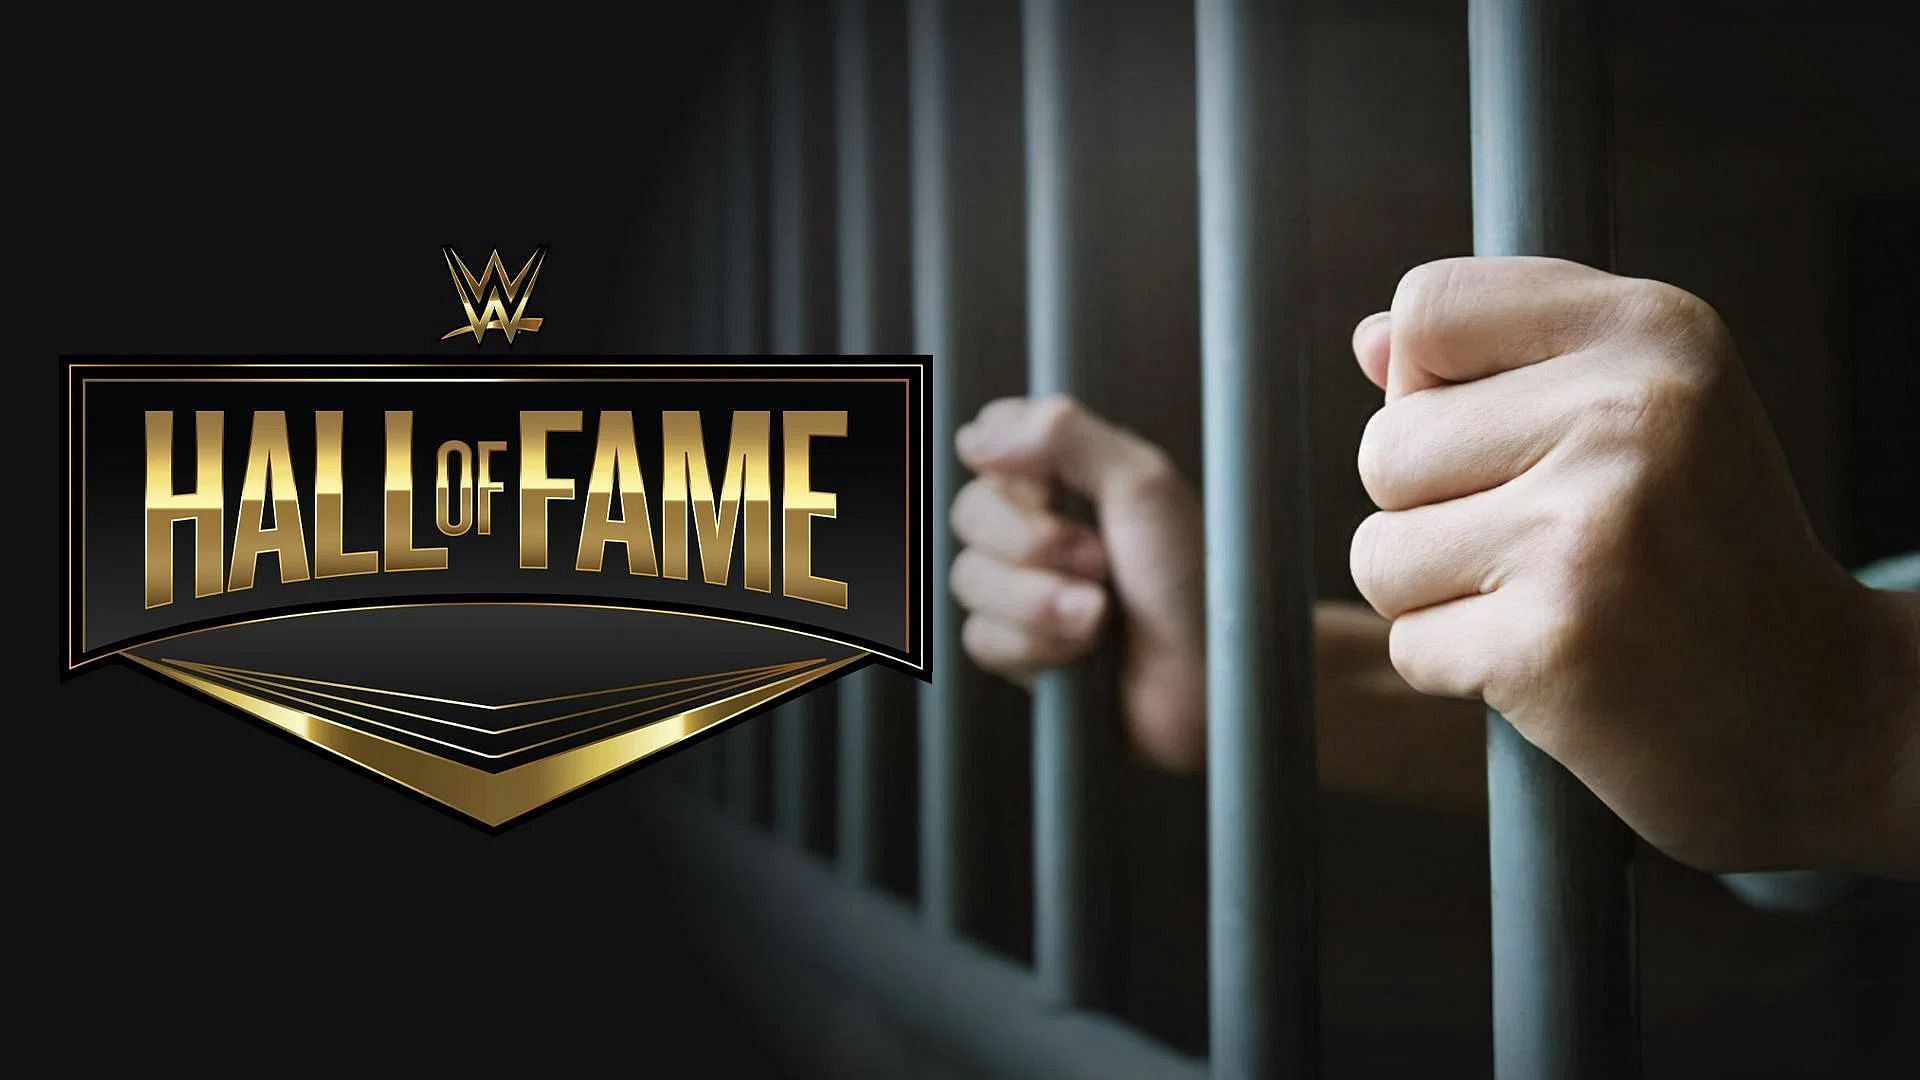 WWE Hall of Famer Sunny is looking to get out of prison early